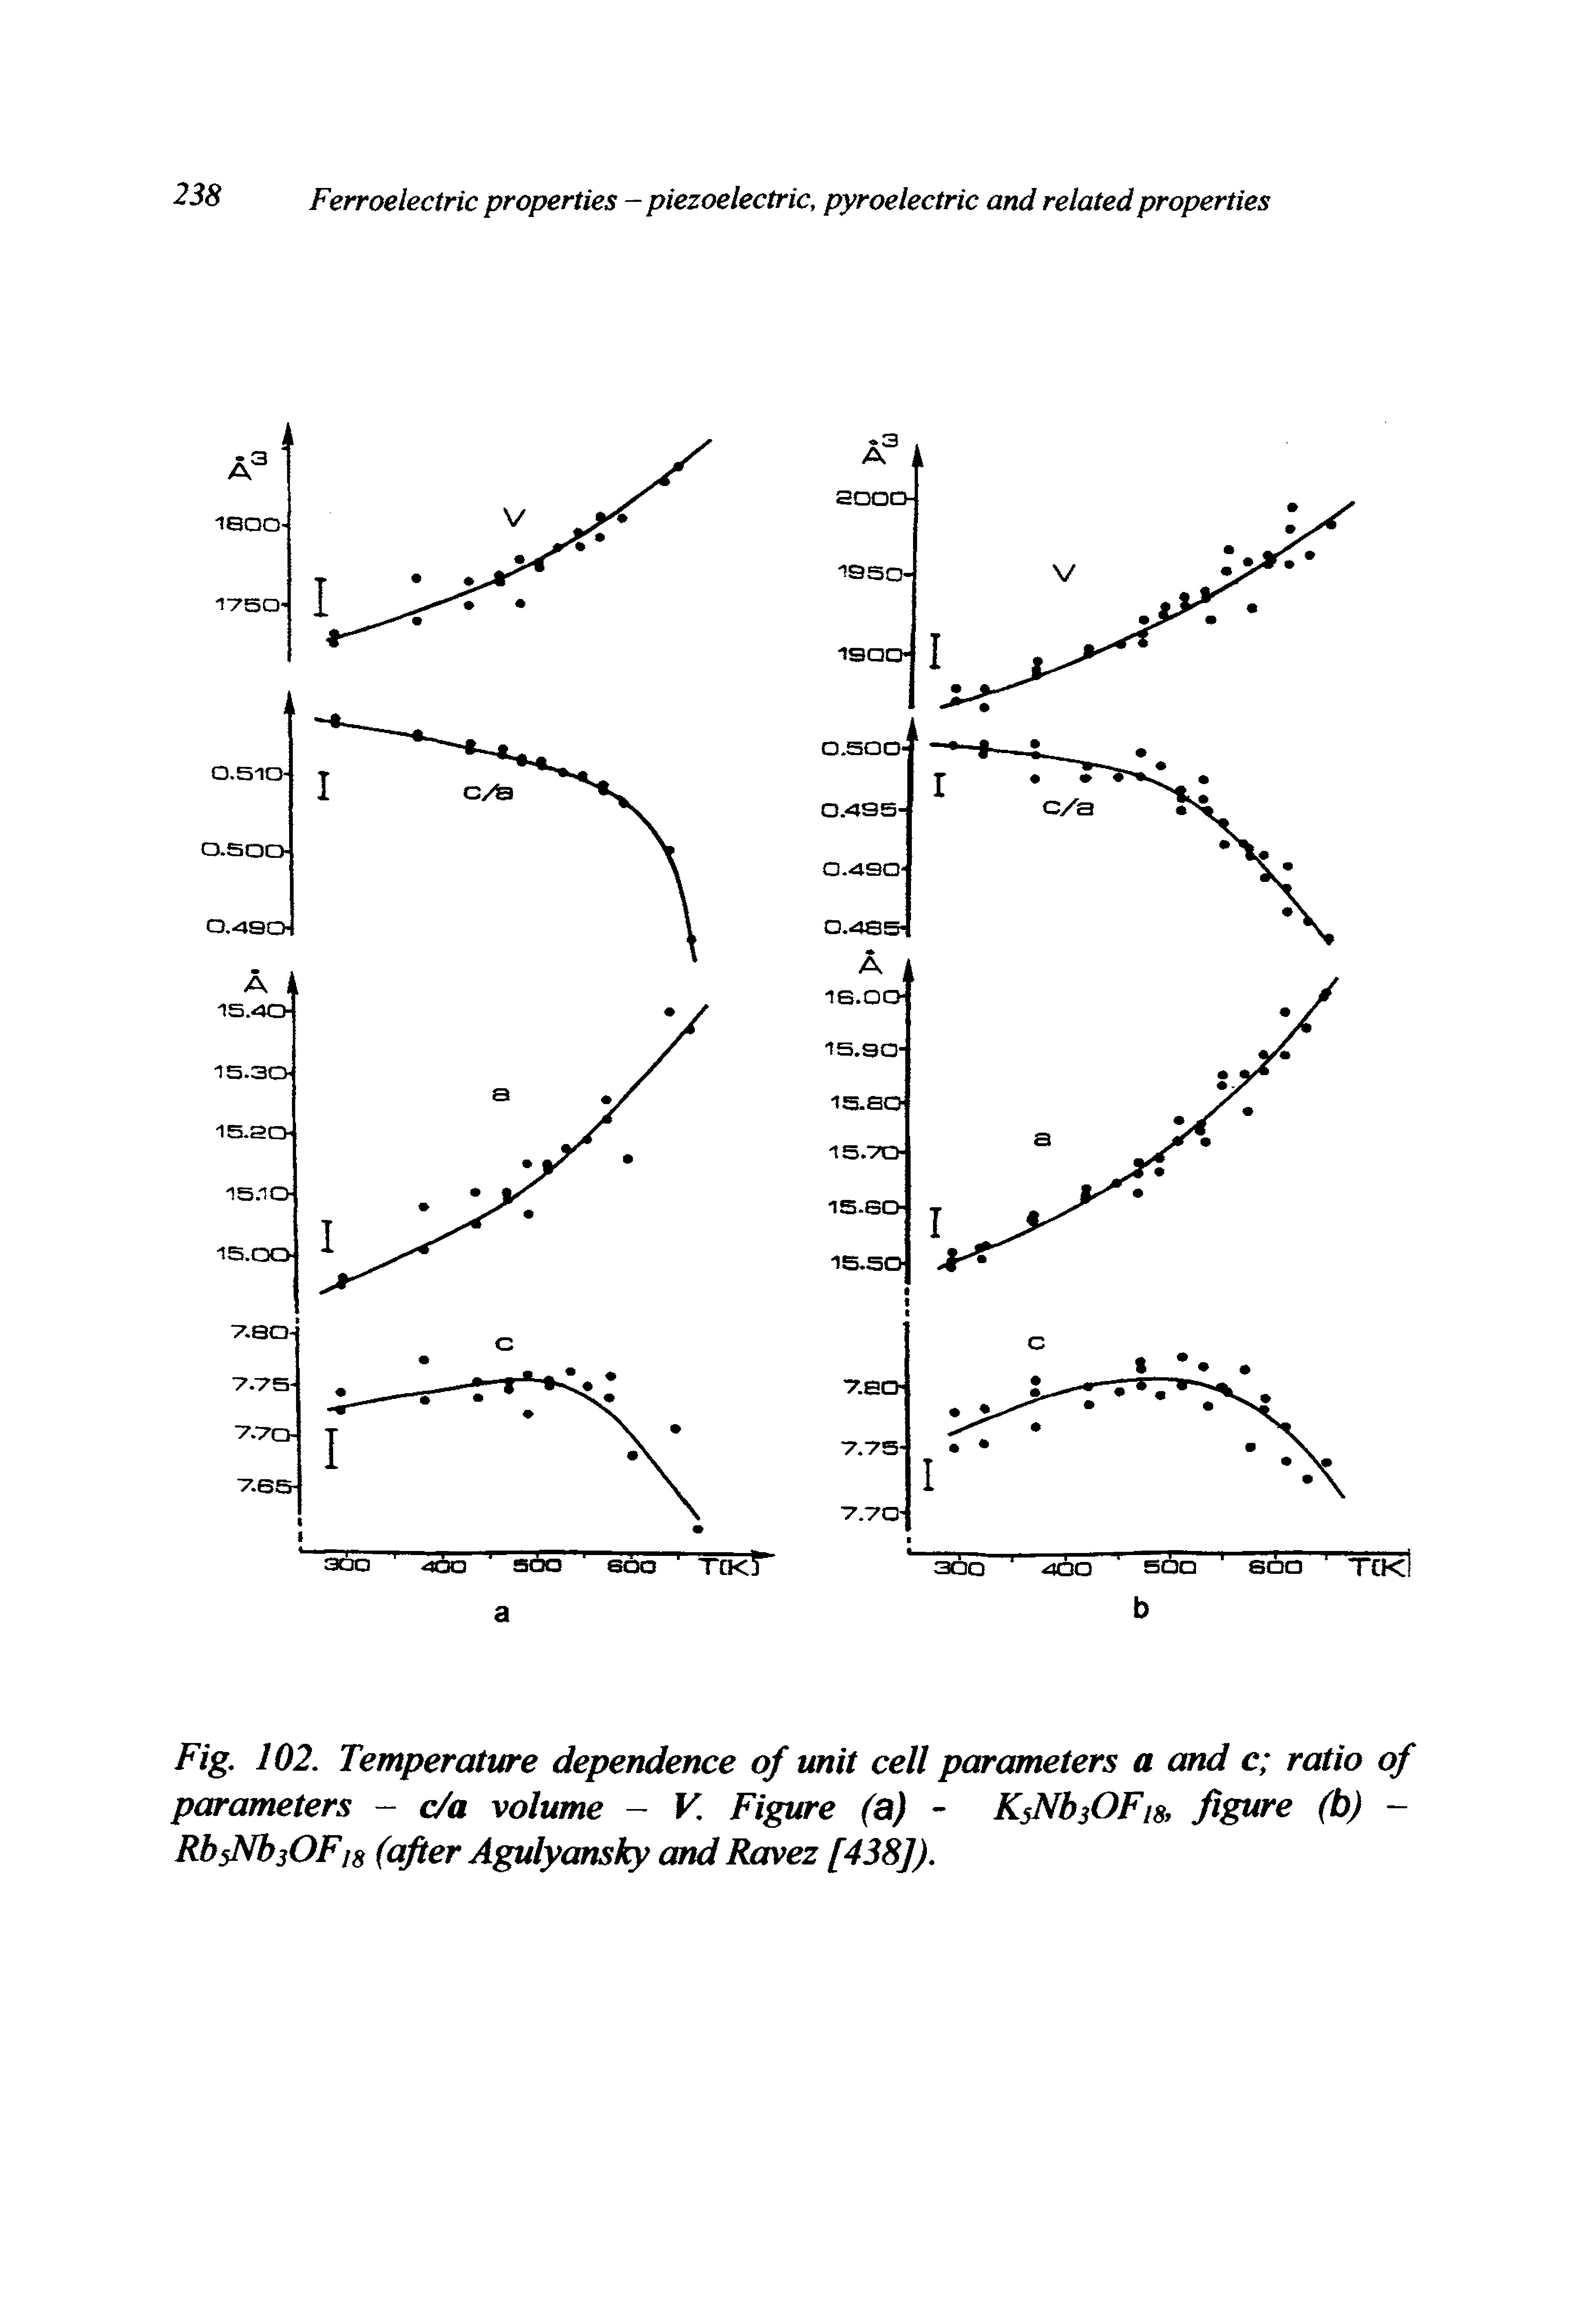 Fig. 102. Temperature dependence of unit cell parameters a and c ratio of parameters - c/a volume - V. Figure (a) - KsNb3OFi8, figure (b) -RbsNb3OFi8 (after Agulyansky and Ravez [438]).